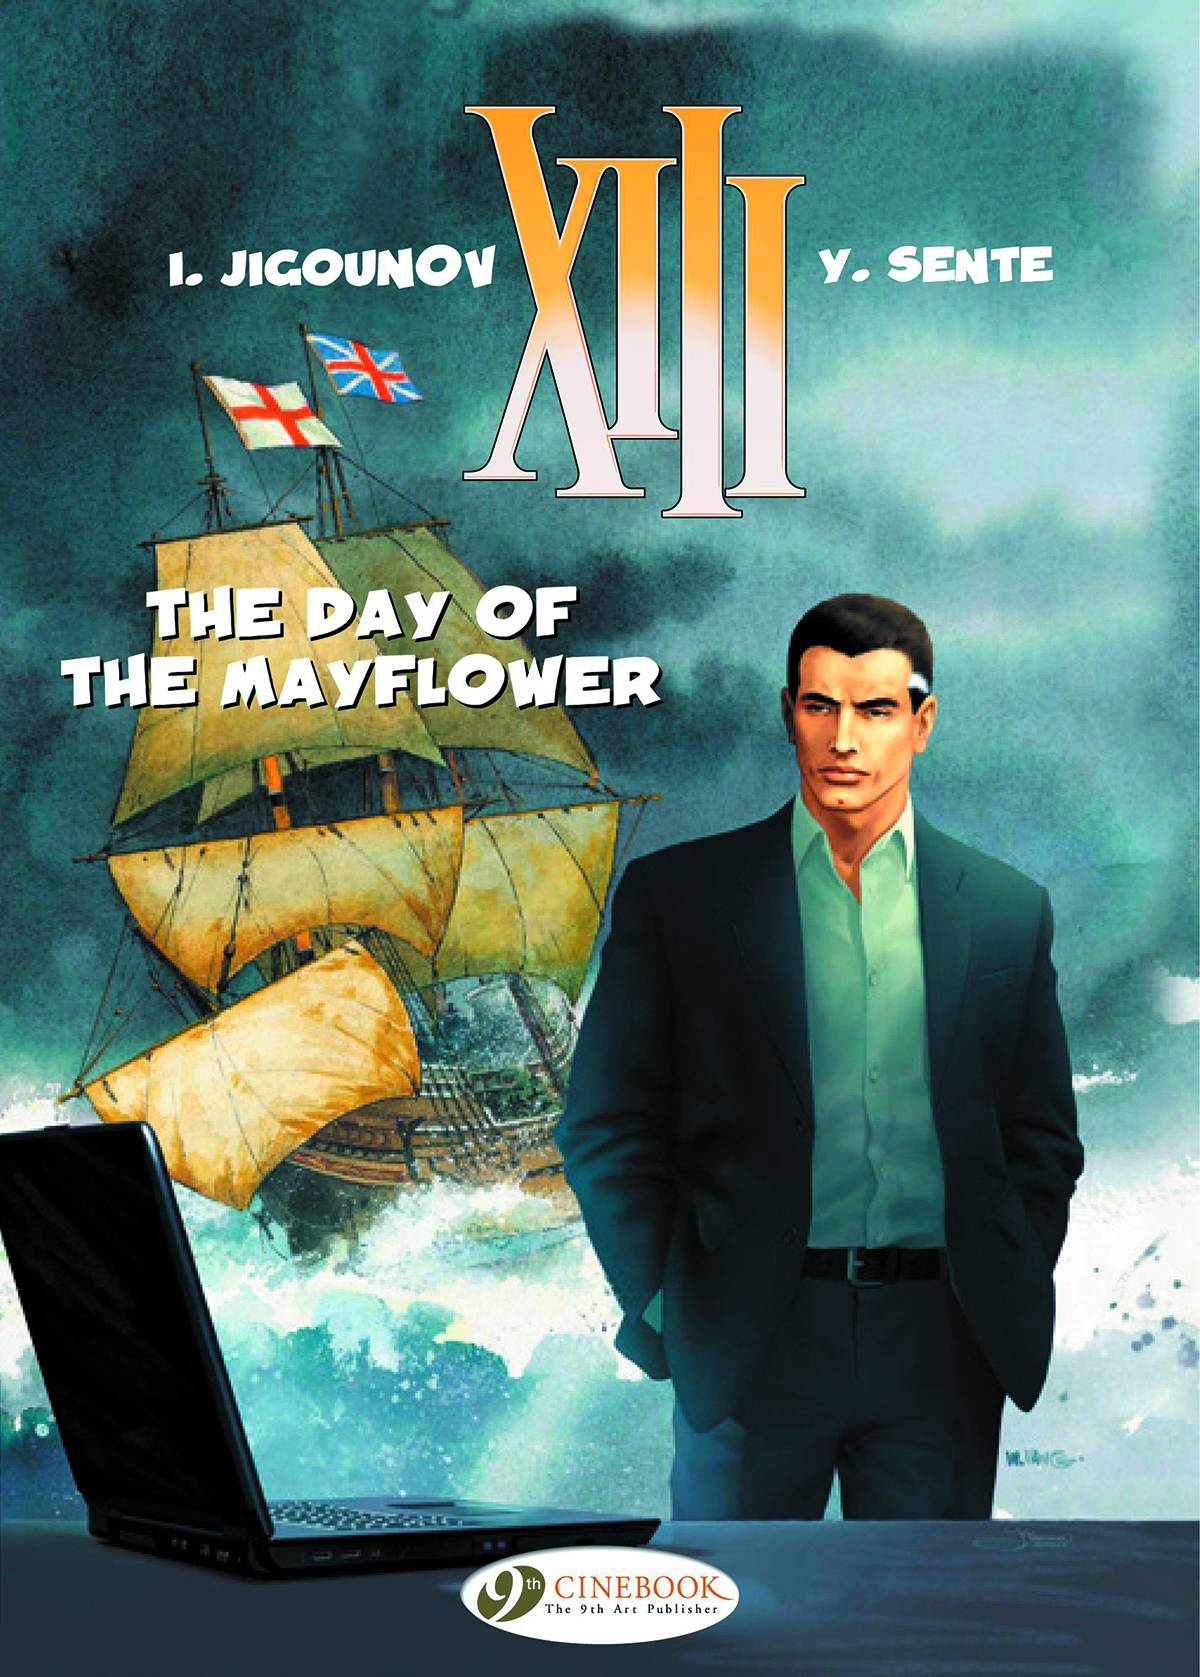 XIII CINEBOOK ED GN VOL 19 (OF 18) DAY OF MAYFLOWER (C: 0-1- - Third Eye